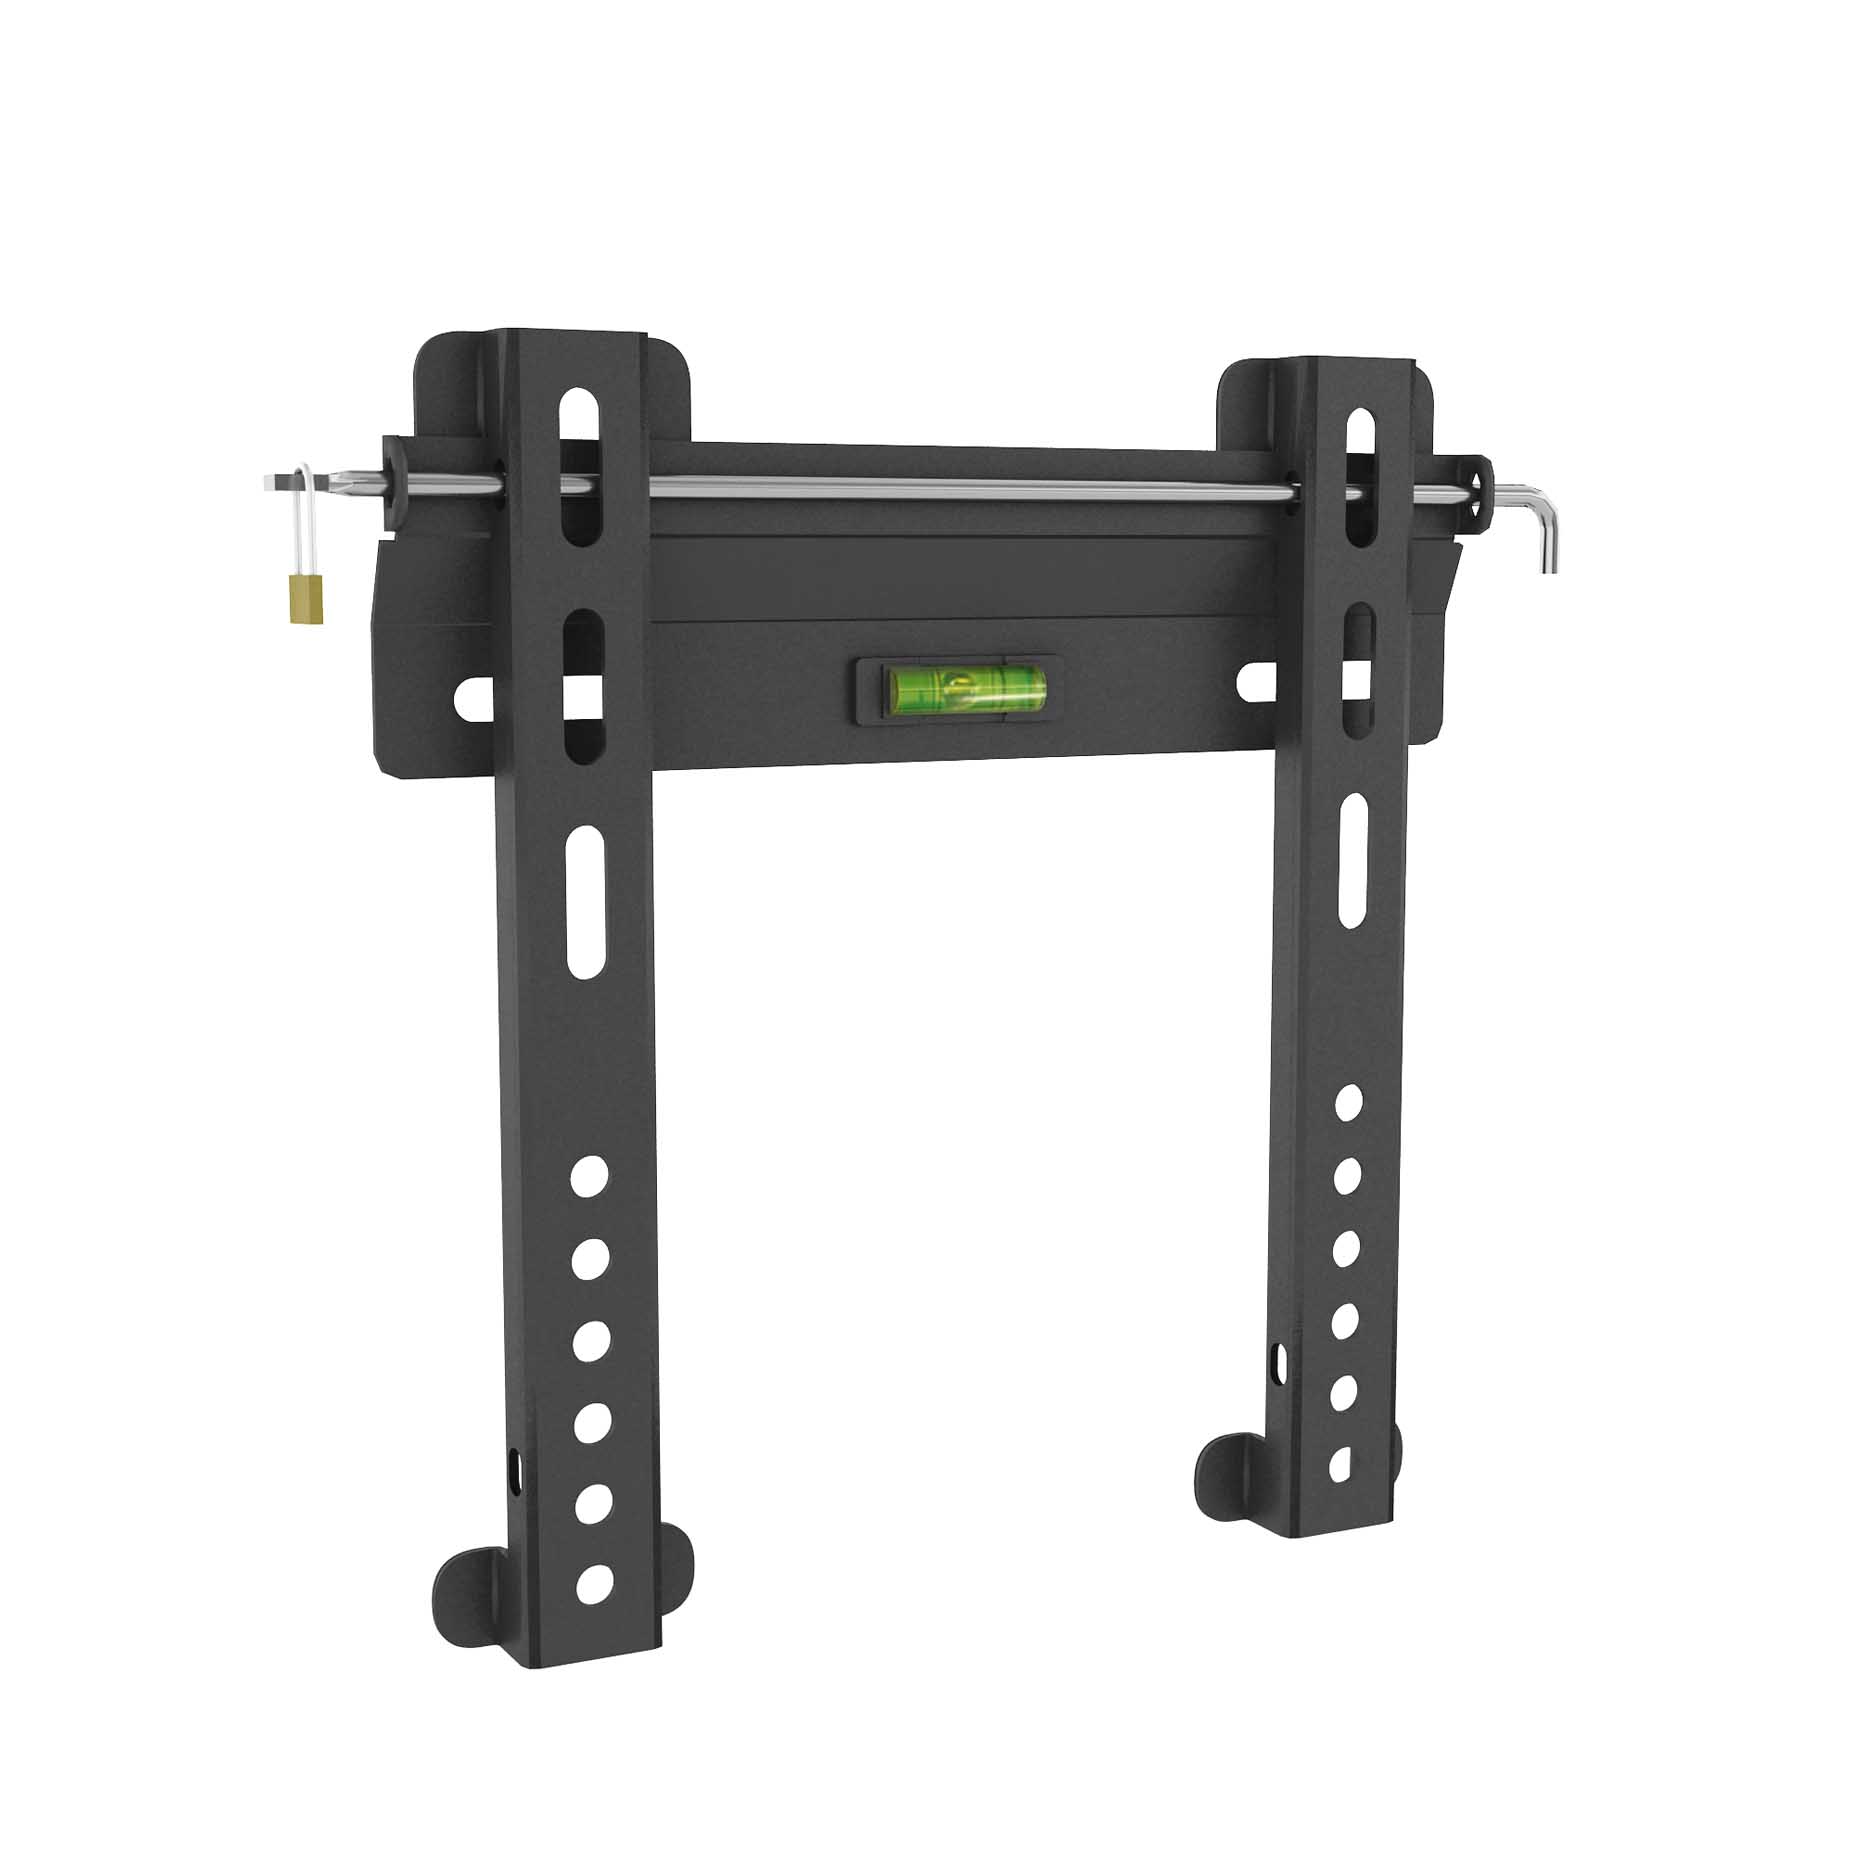 Sonax Fixed Low Profile Wall Mount for 18" - 32" TVs - image 1 of 3